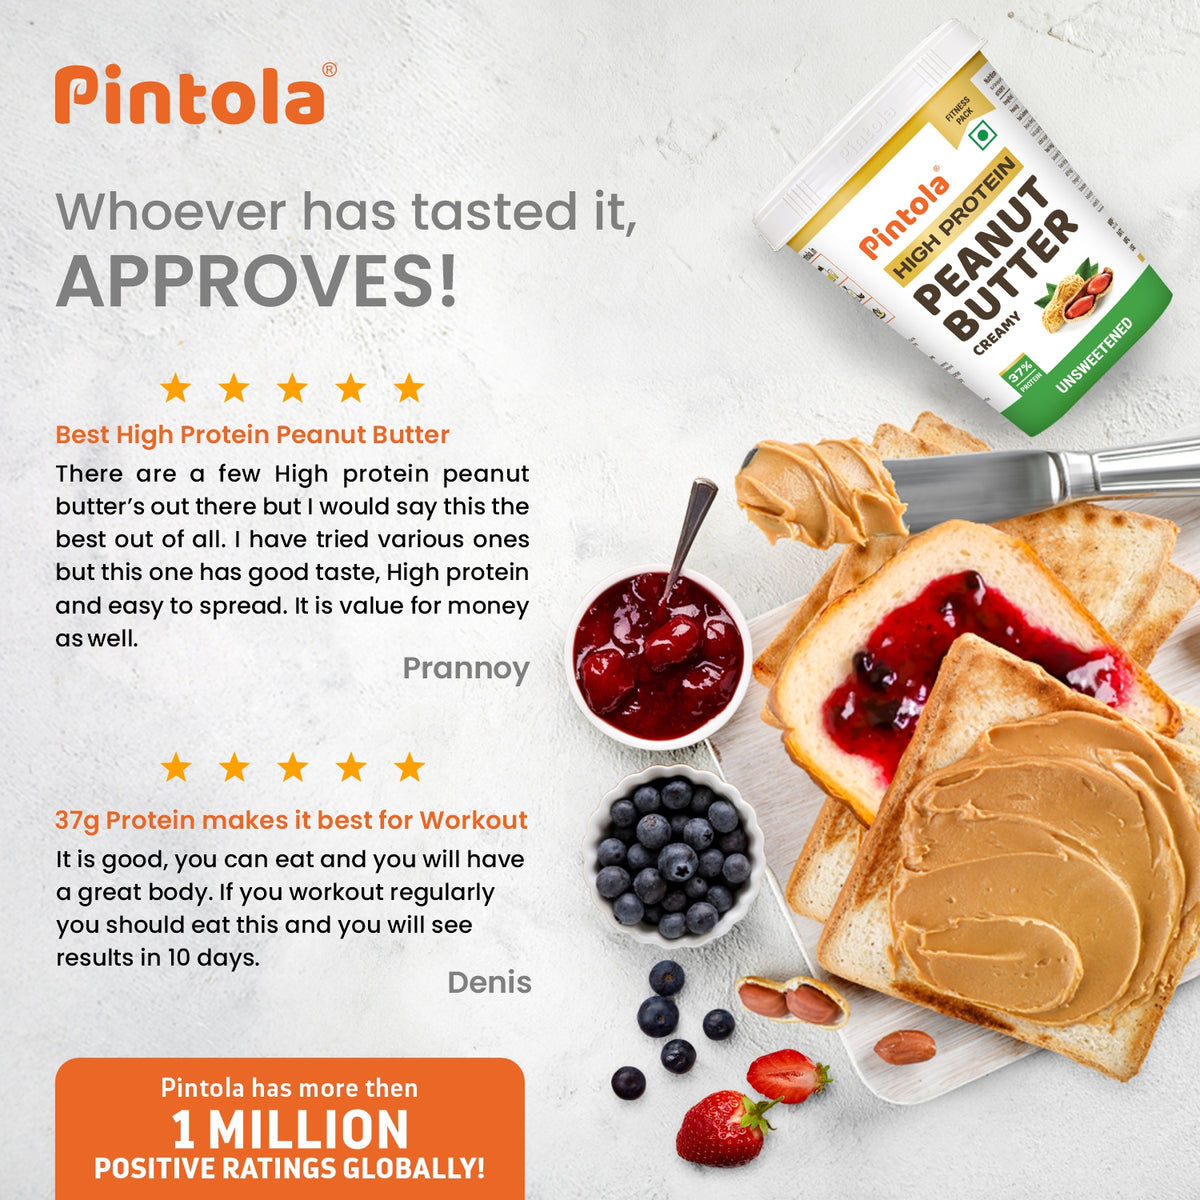 High Protein All Natural Peanut Butter | Unsweetened